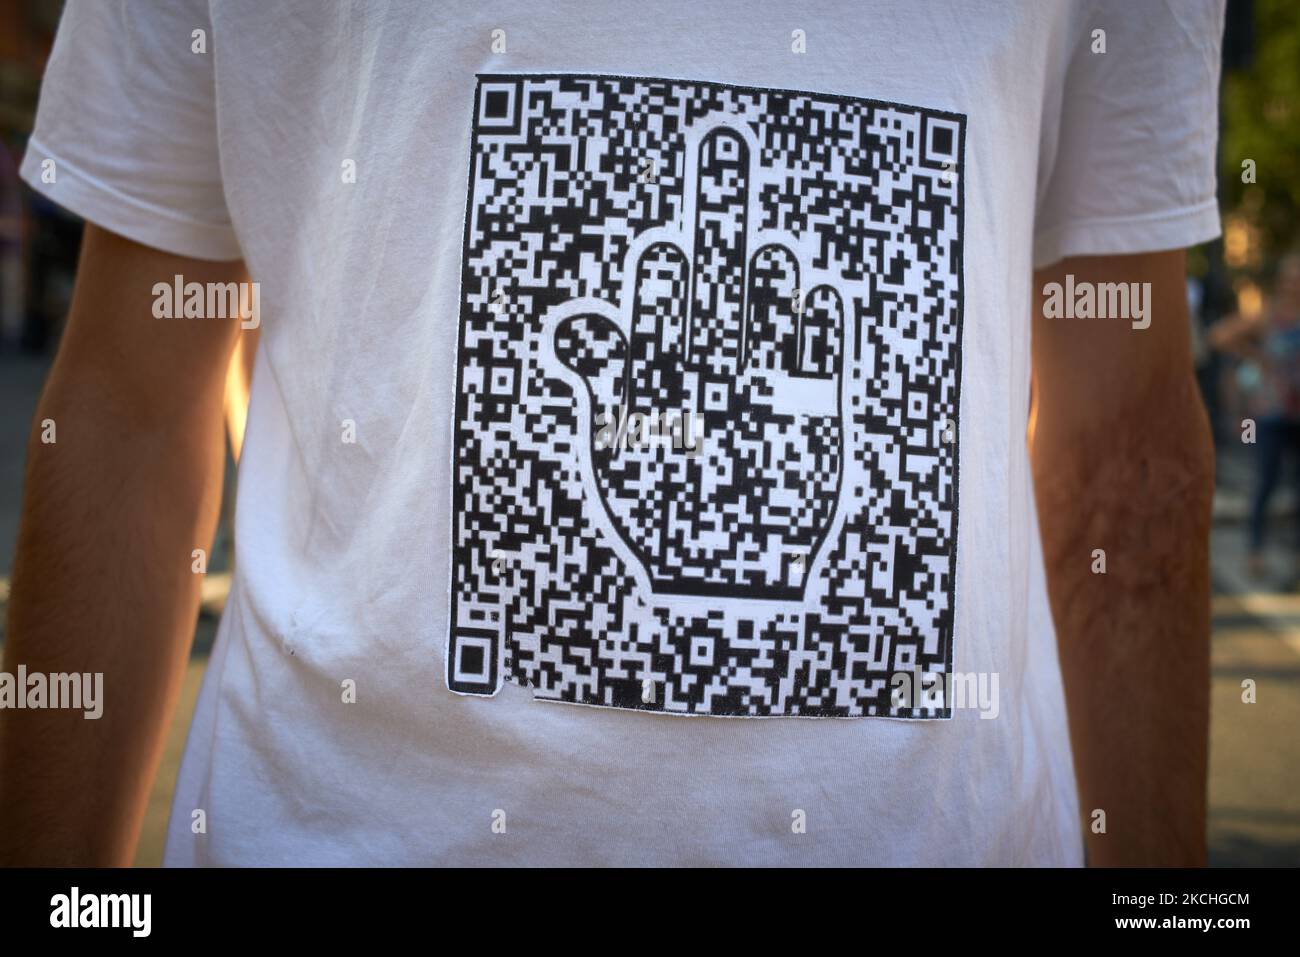 A protester wears a hirt depicting a QR code showing a miffle finger. Between 1500 and 3000 protesters took to the streets in Toulouse against the near mandatory vaccination and against the health pass after the Macron's speech on July 12th. Macron announced the health pass will be mandatory for going in public places such as cafes, theates, concerts hall, cinemas, shops, public transportation (train, bus, tramway), etc. The delay between the first jab and the health pass obtention will be five weeks. But the prohibition for public spaces for non-vaccinated people will go on August 1st. Some s Stock Photo